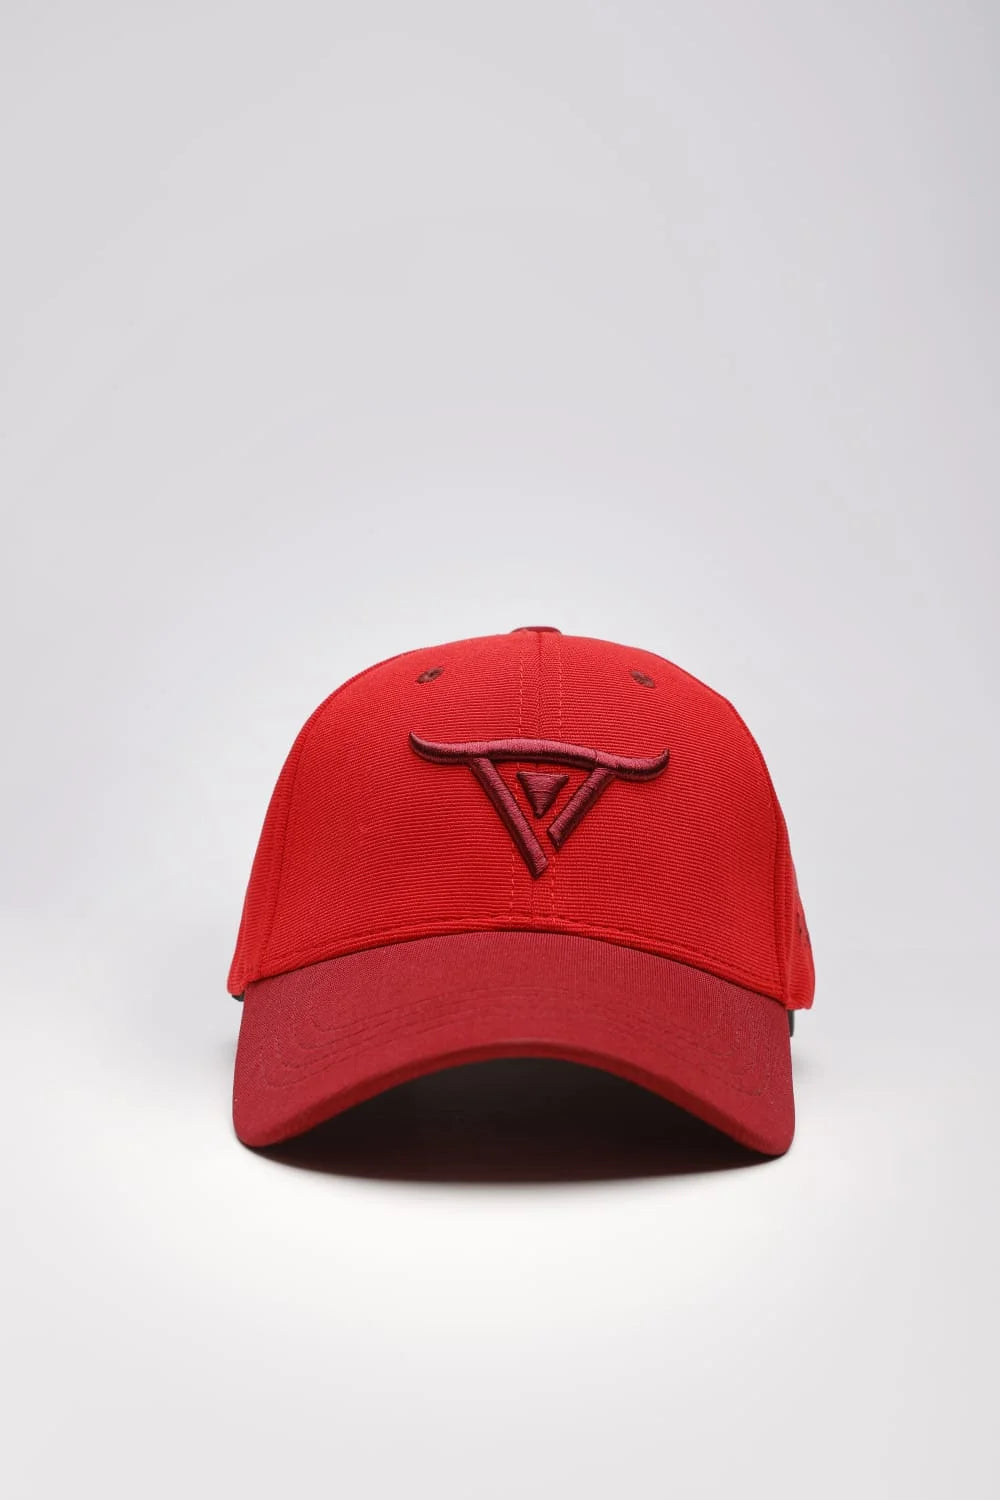 Unisex Red solid baseball cap, has a visor by One Player